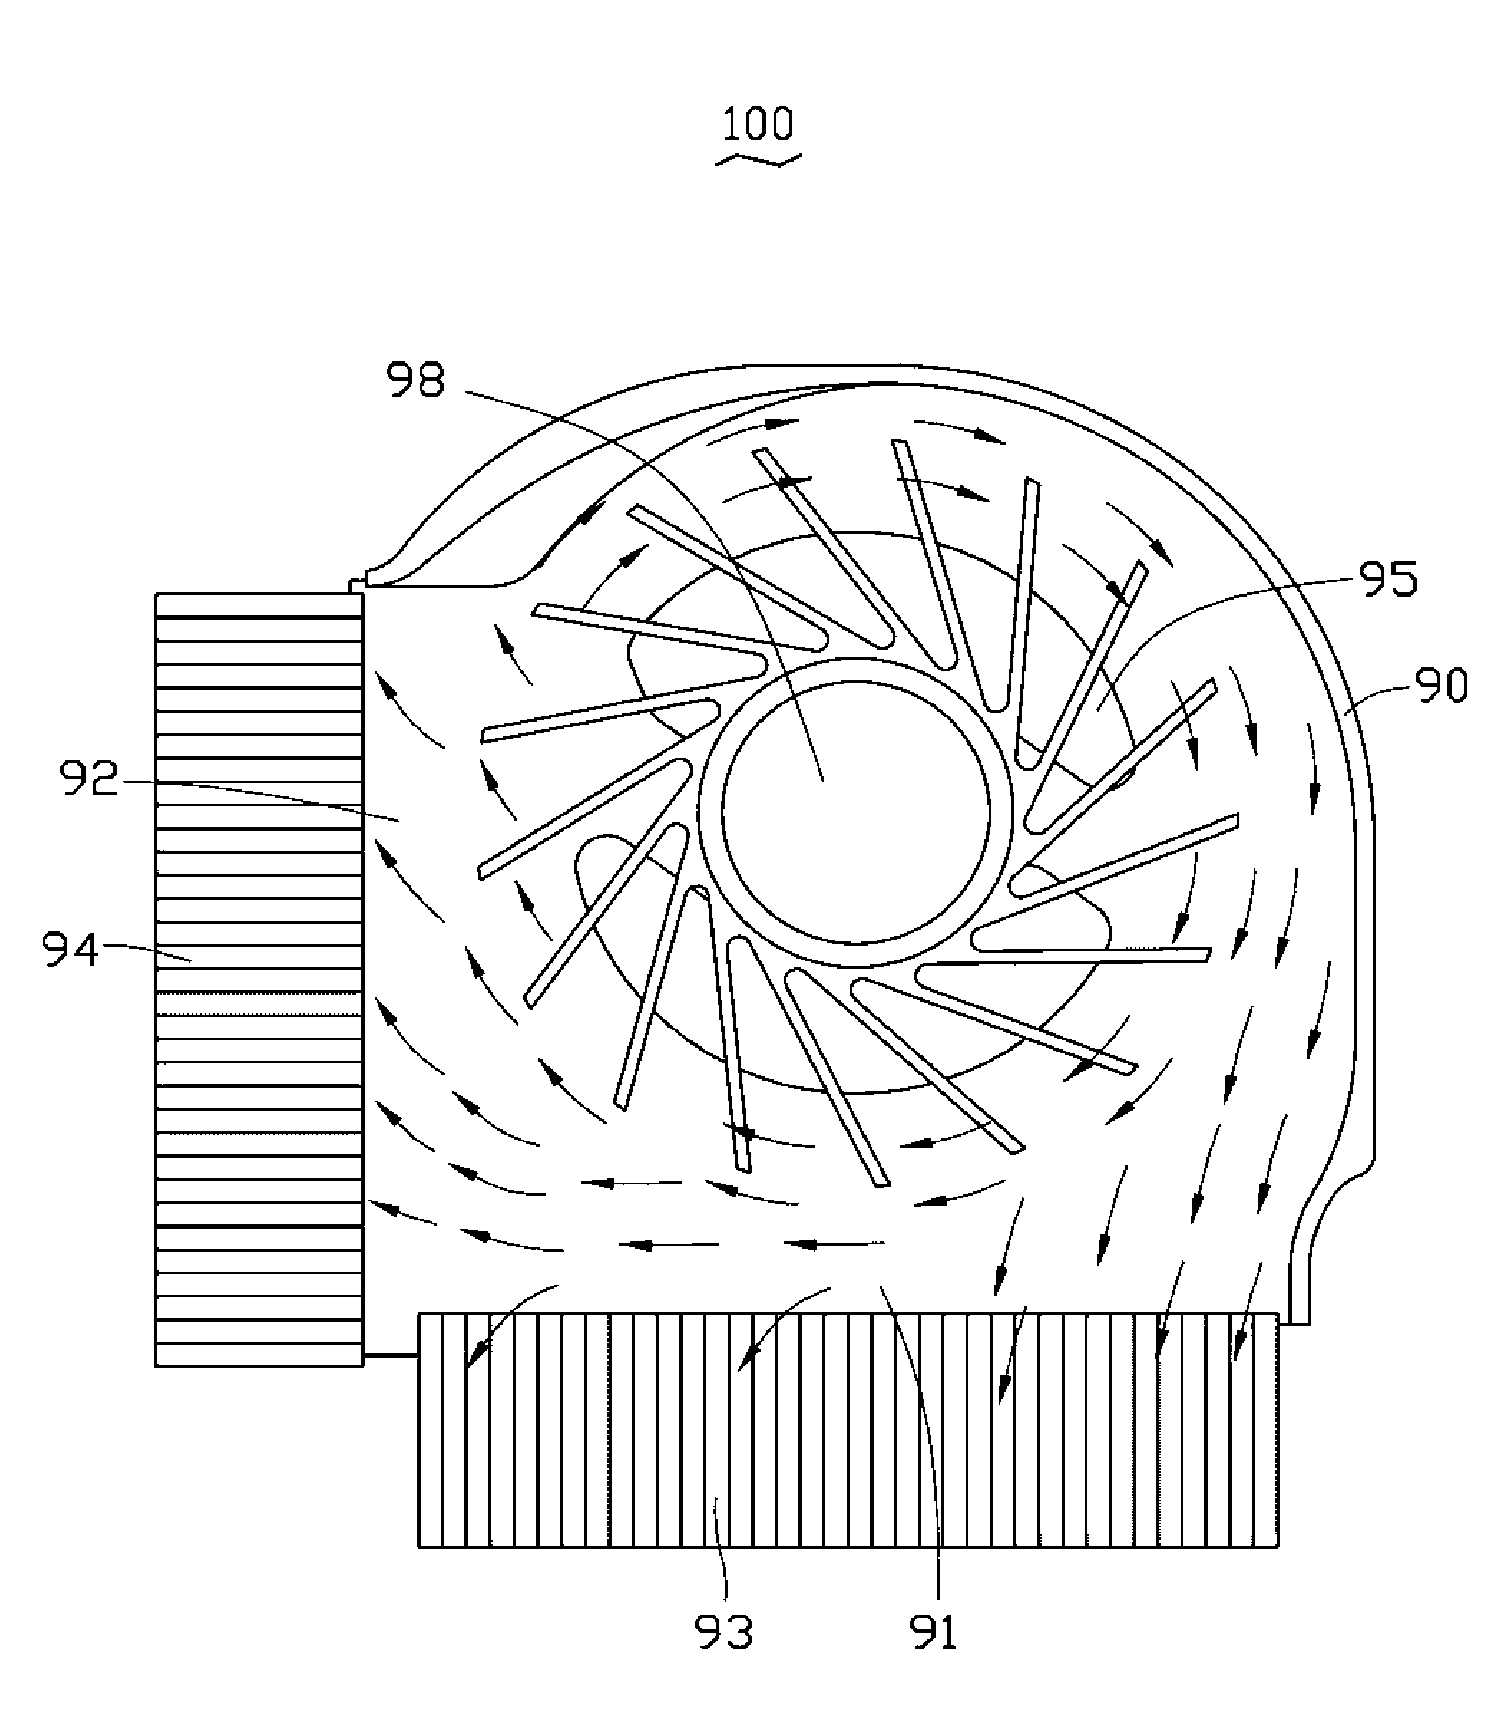 Heat sink and centrifugal fan applied by same